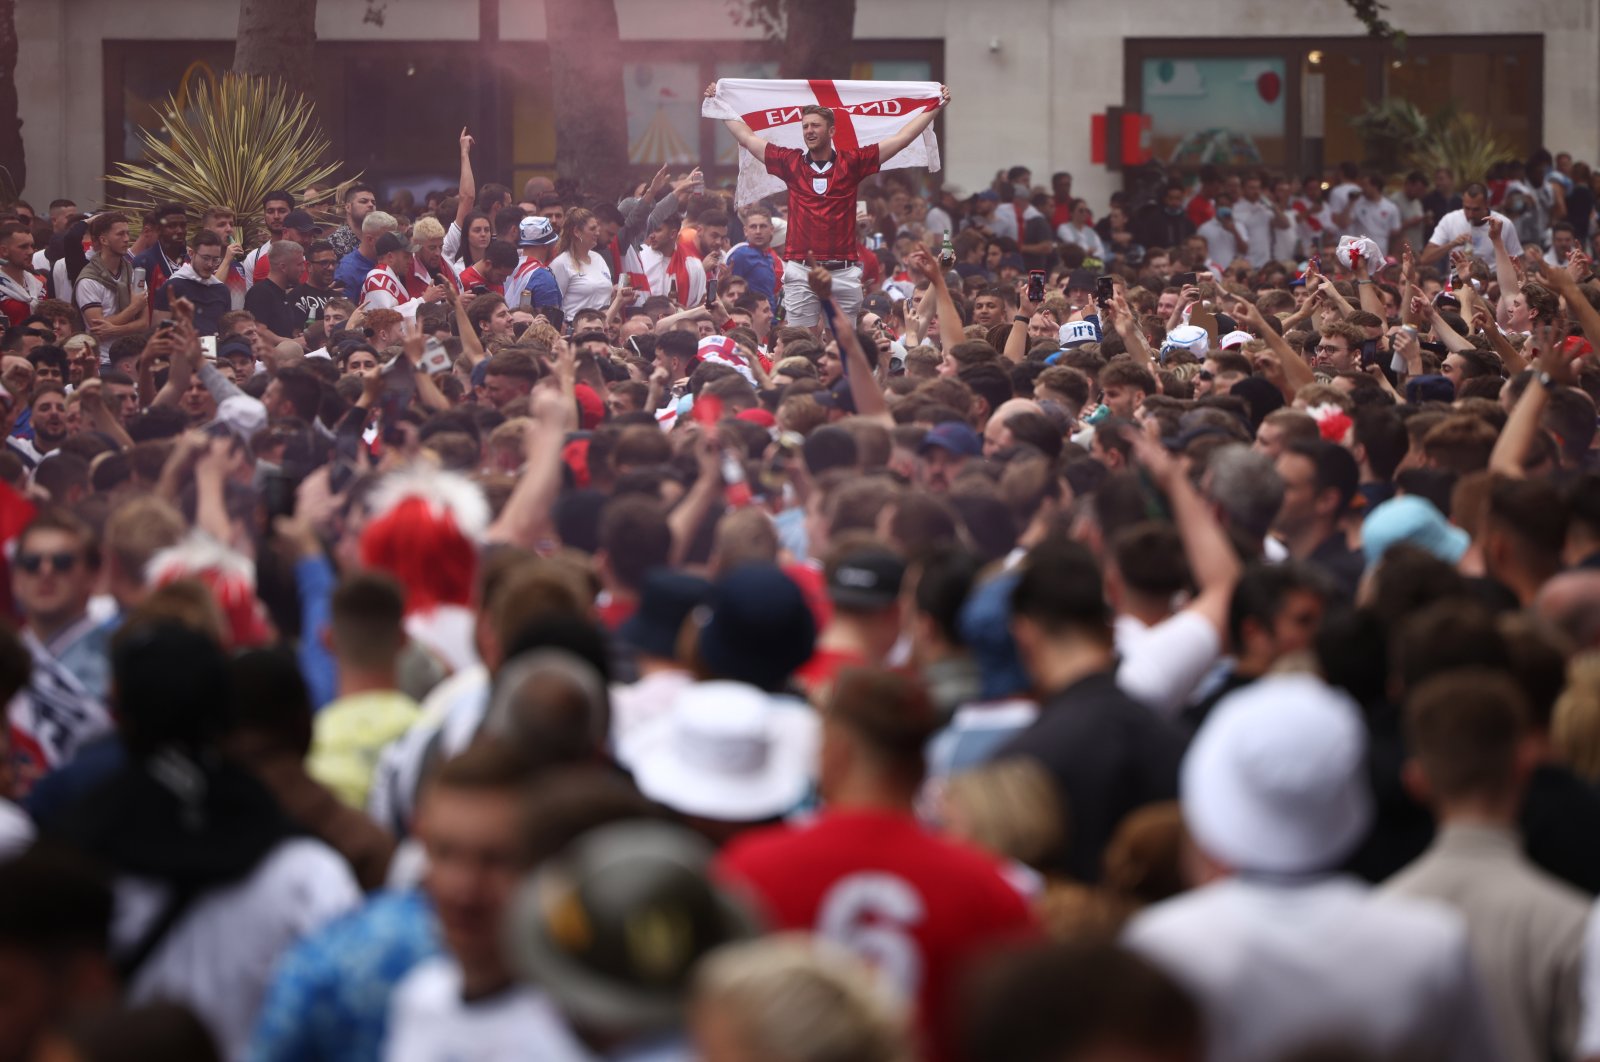 England fans gather at Leicester Square ahead of the Euro 2020 final between England and Italy, London, England, July 11, 2021. (Reuters Photo)